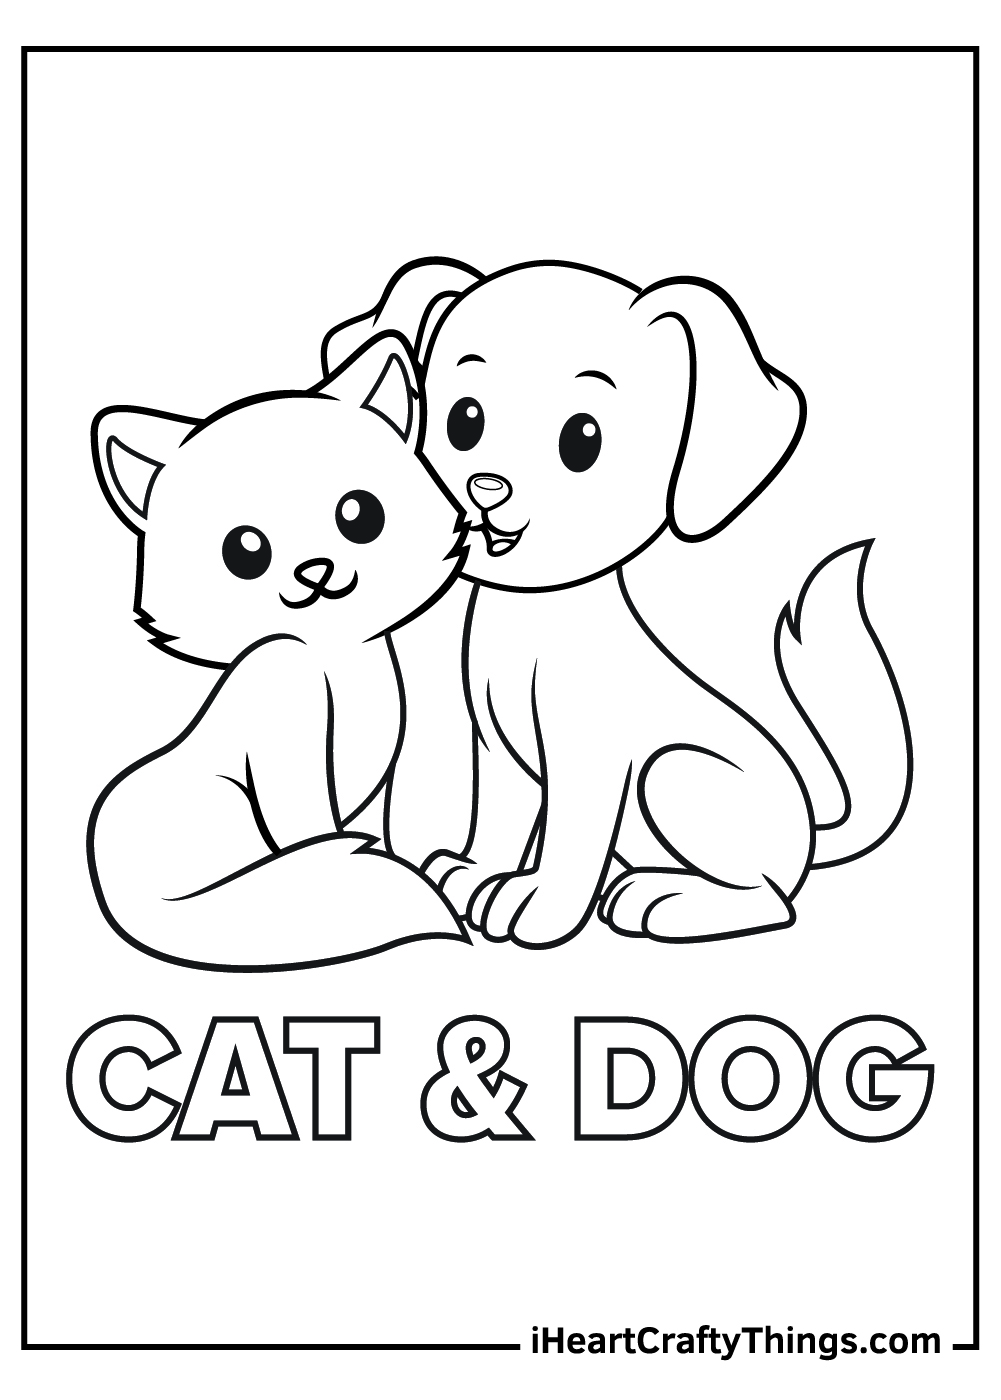 Dog Coloring Pages That Look Real